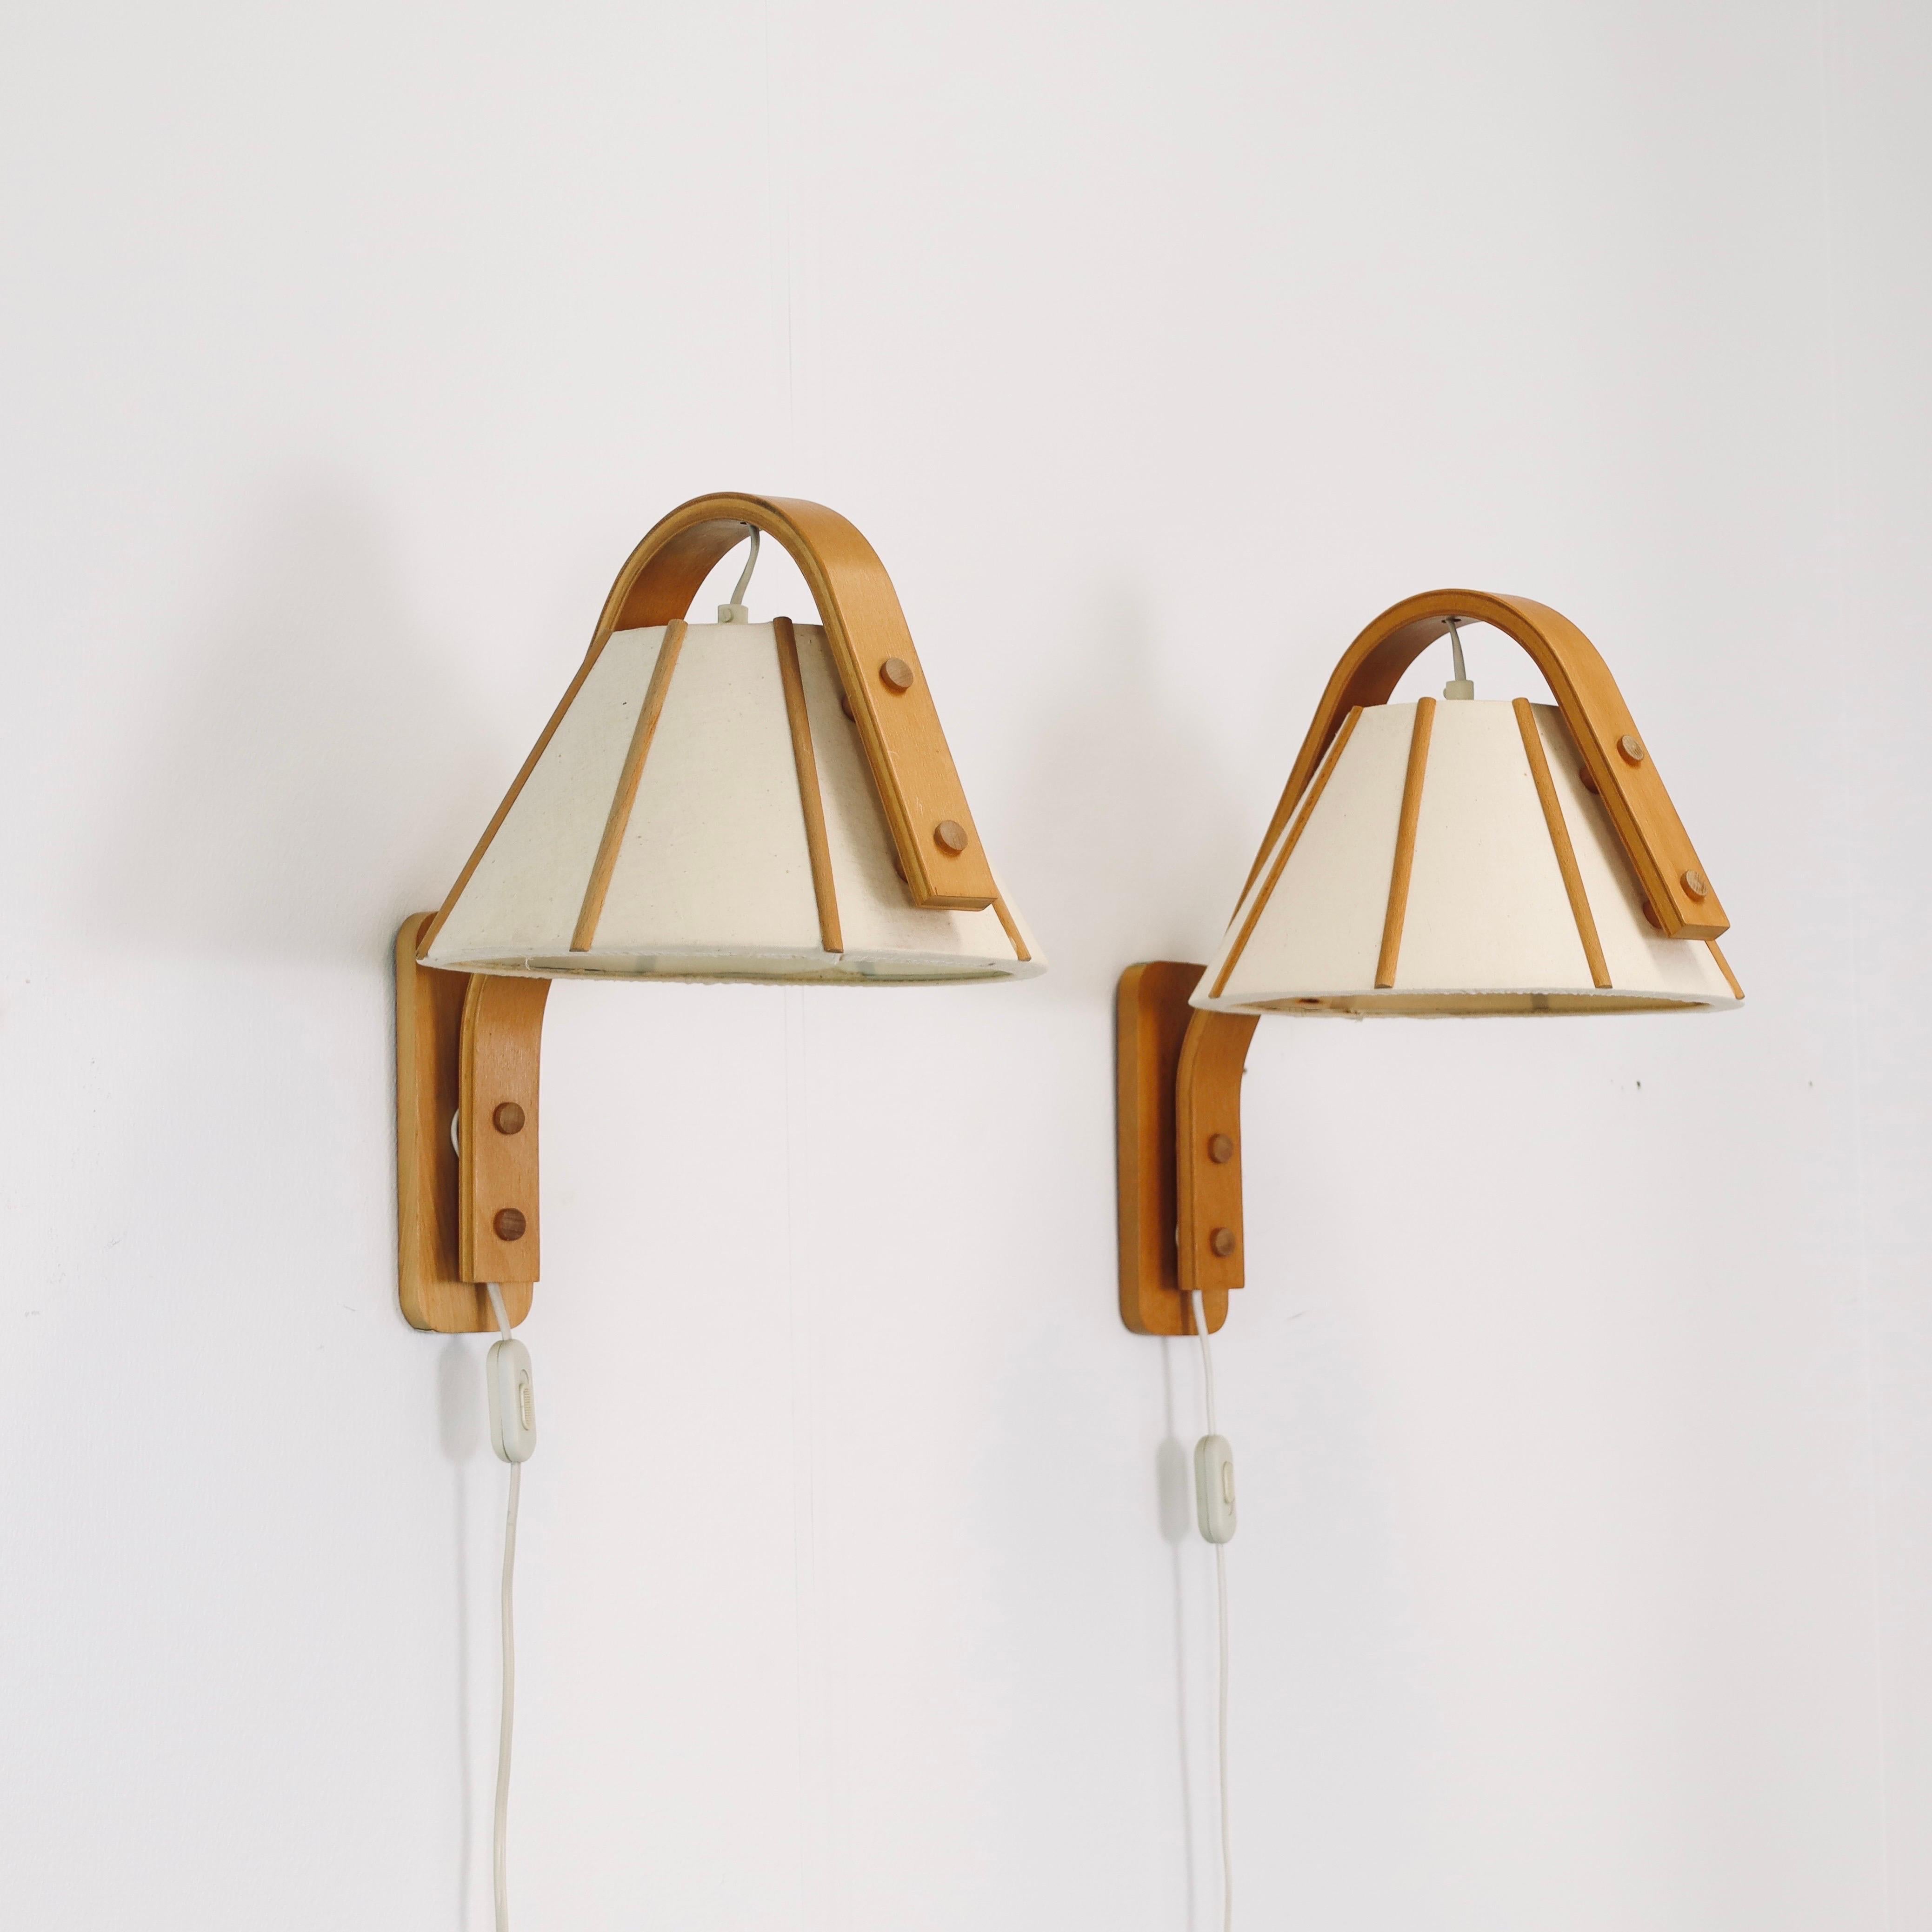 Set Scandinavian Modern sconces in bend Beech wood designed by Jan Wickelgren in the 1970s for Aneta Sweden. The set is in great vintage condition. A Nordic touch for a beautiful home.

* A set of two (2) bend beech veneer wall lamps with light